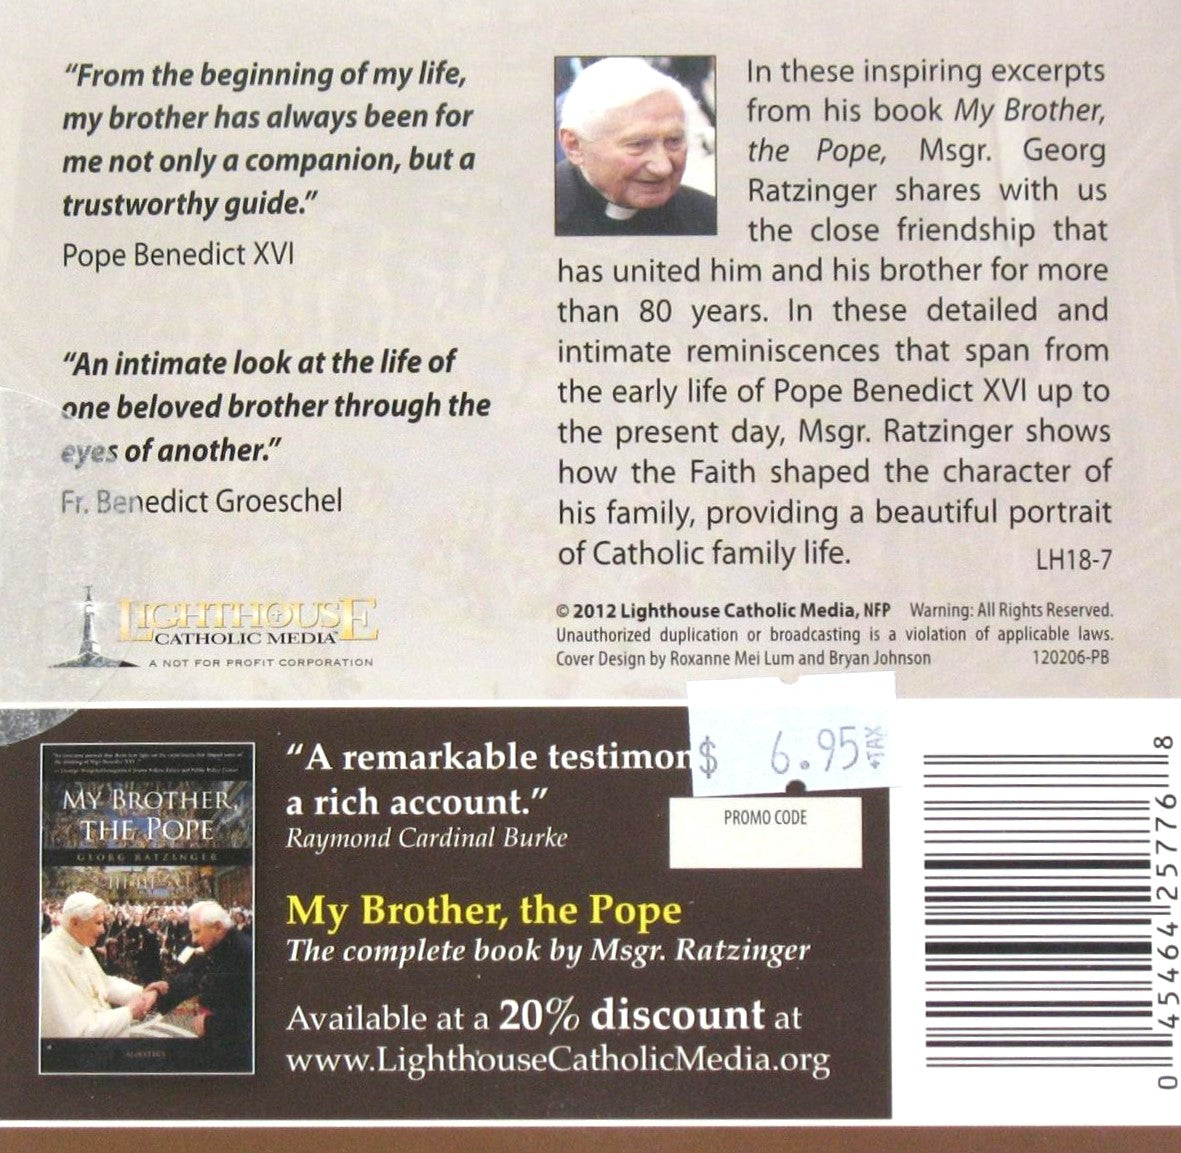 My Brother, The Pope by Msgr. Georg Ratzinger - Excerpts from the Book  - Abridged - CD